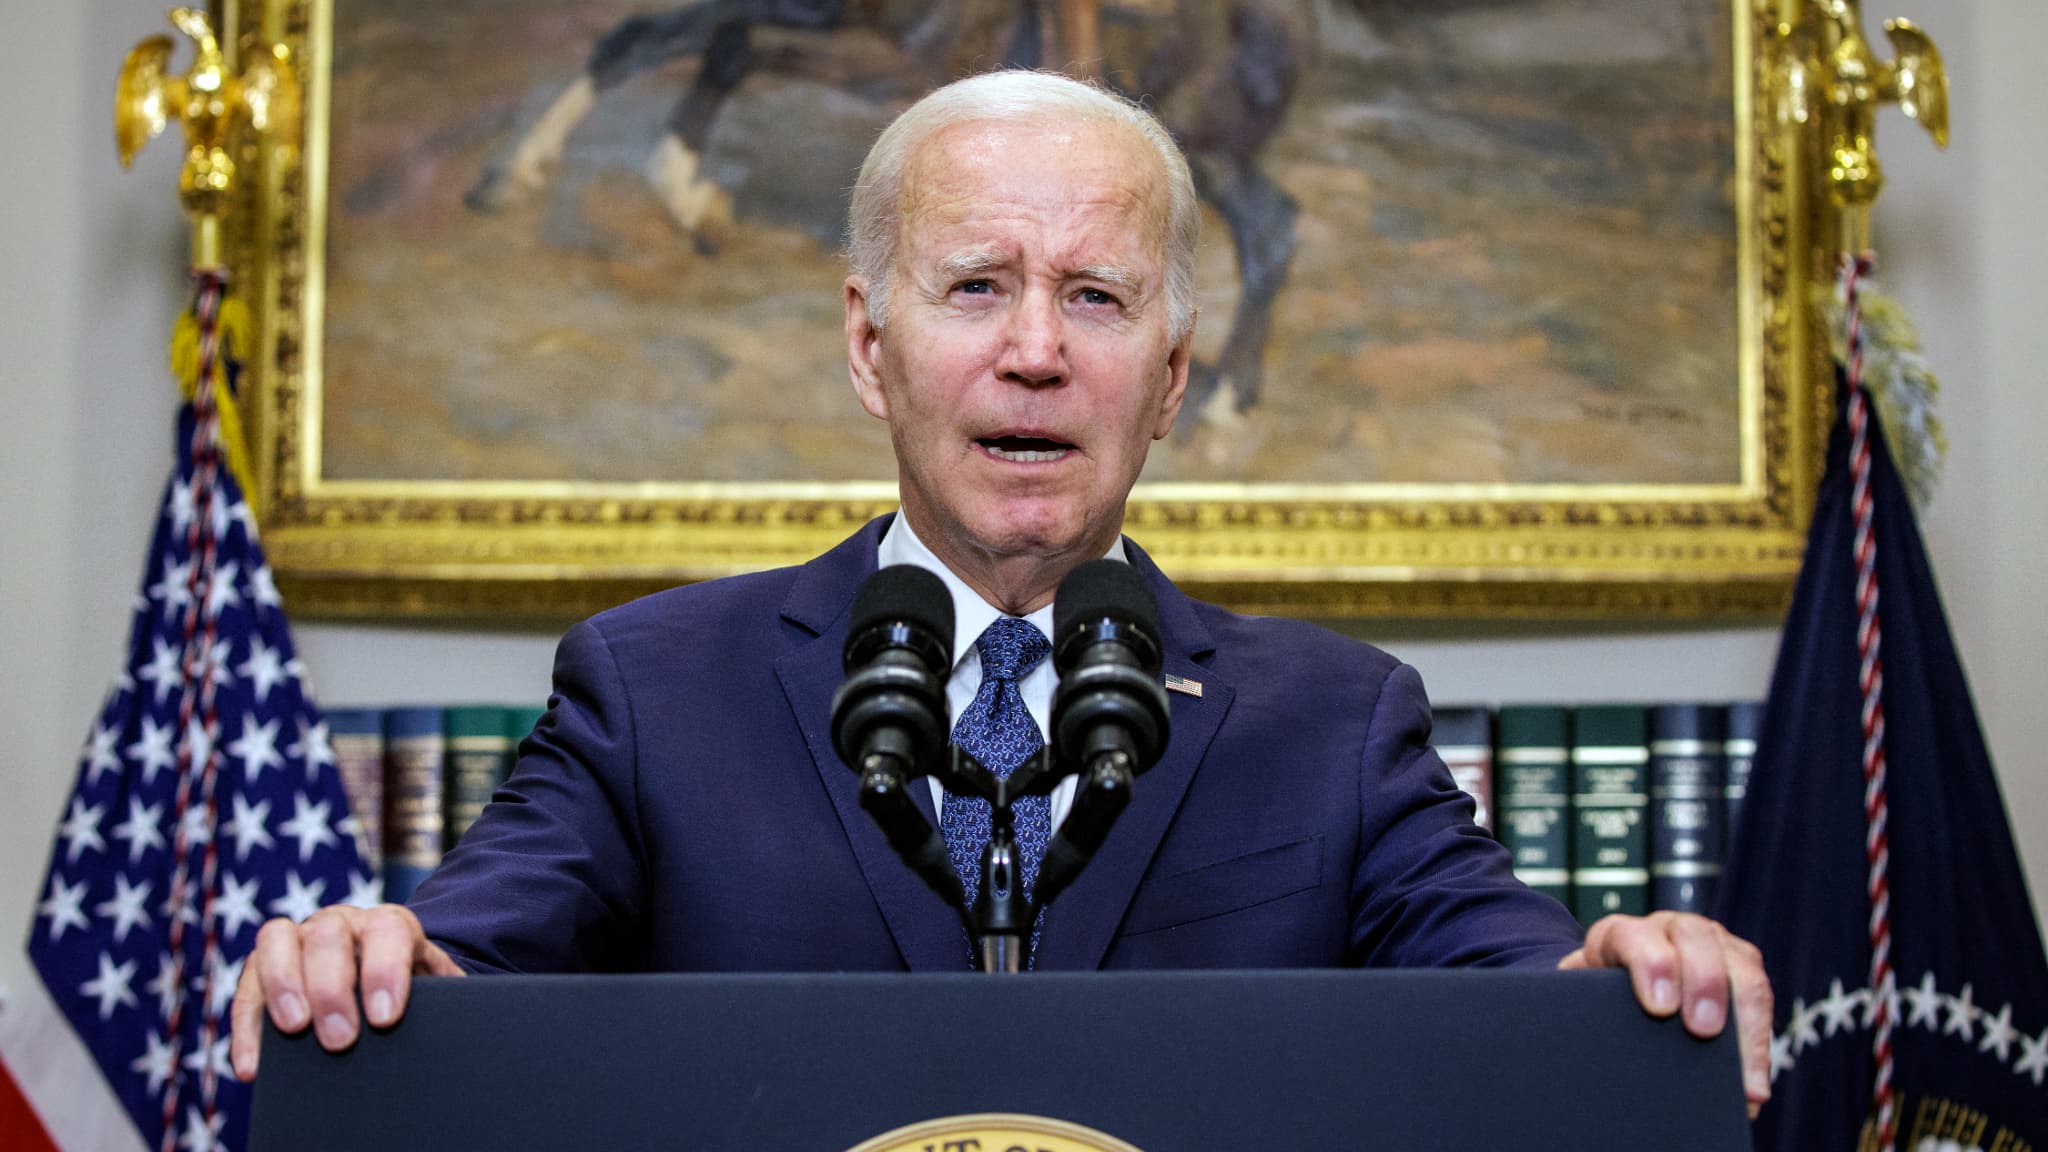 Joe Biden announced that the US had destroyed the last of its chemical weapons